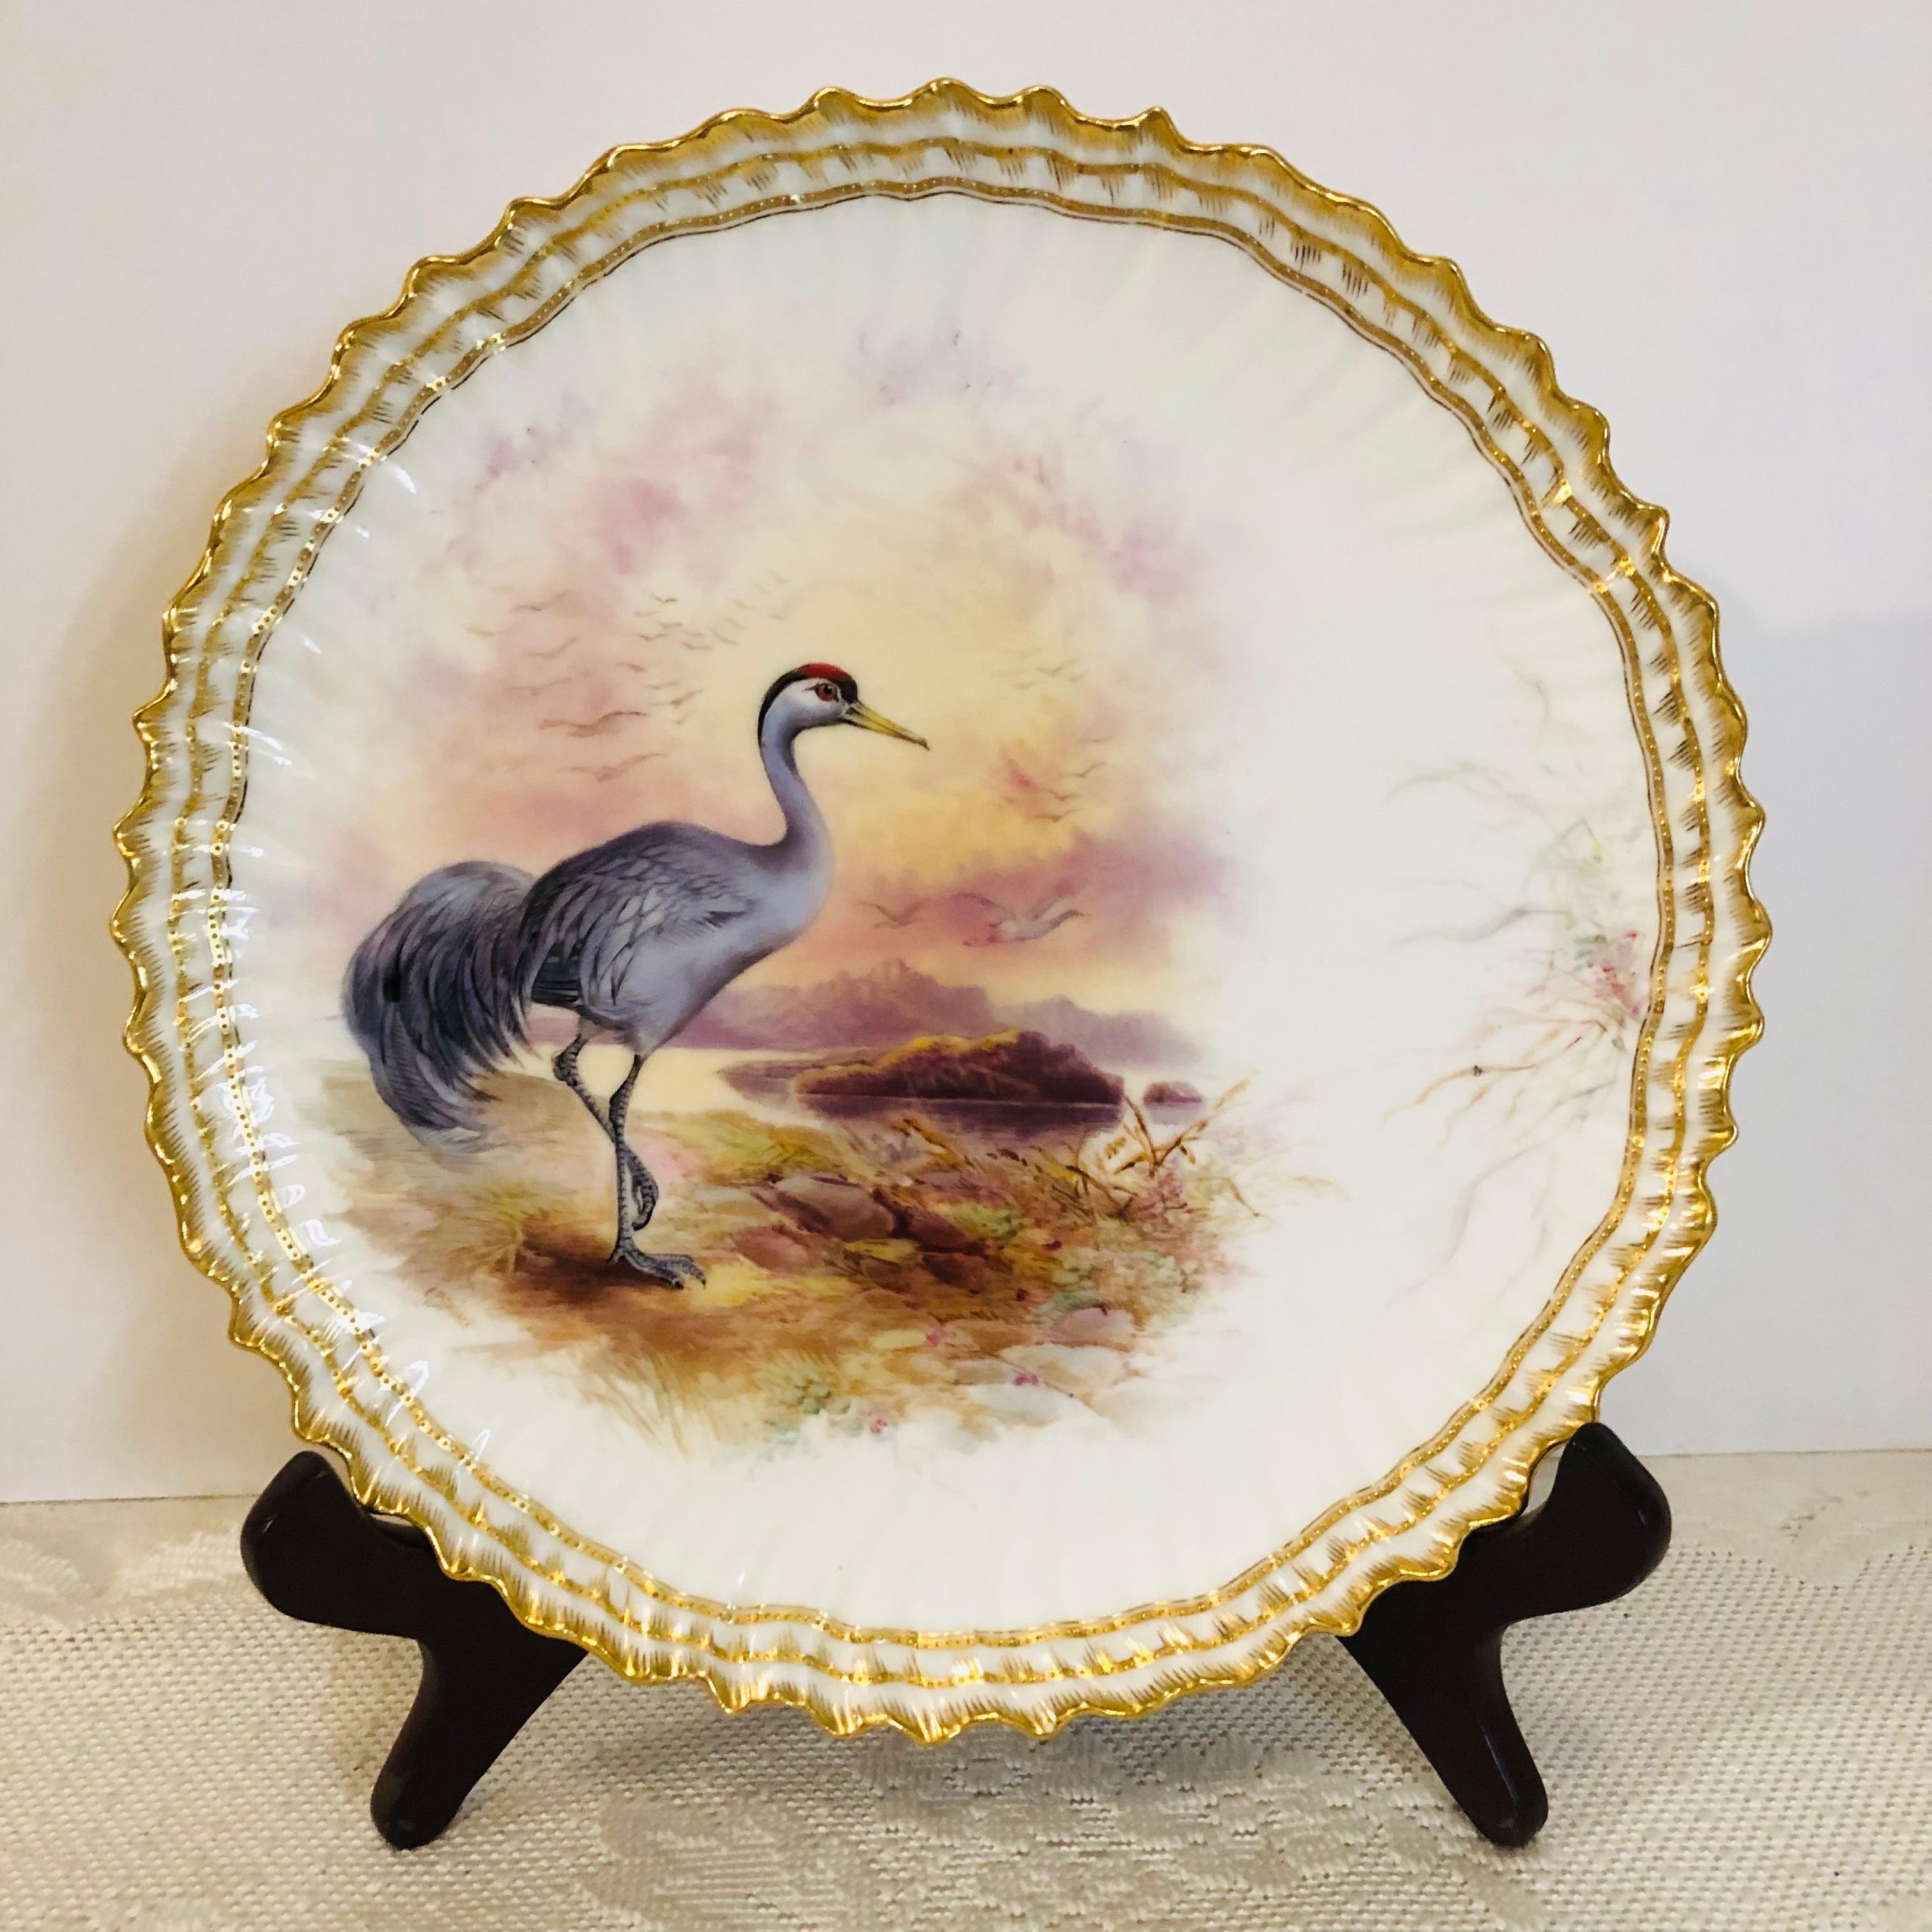 Set of 11 Cauldon Plates Each Painted Exquisitely With a Different Bird  6